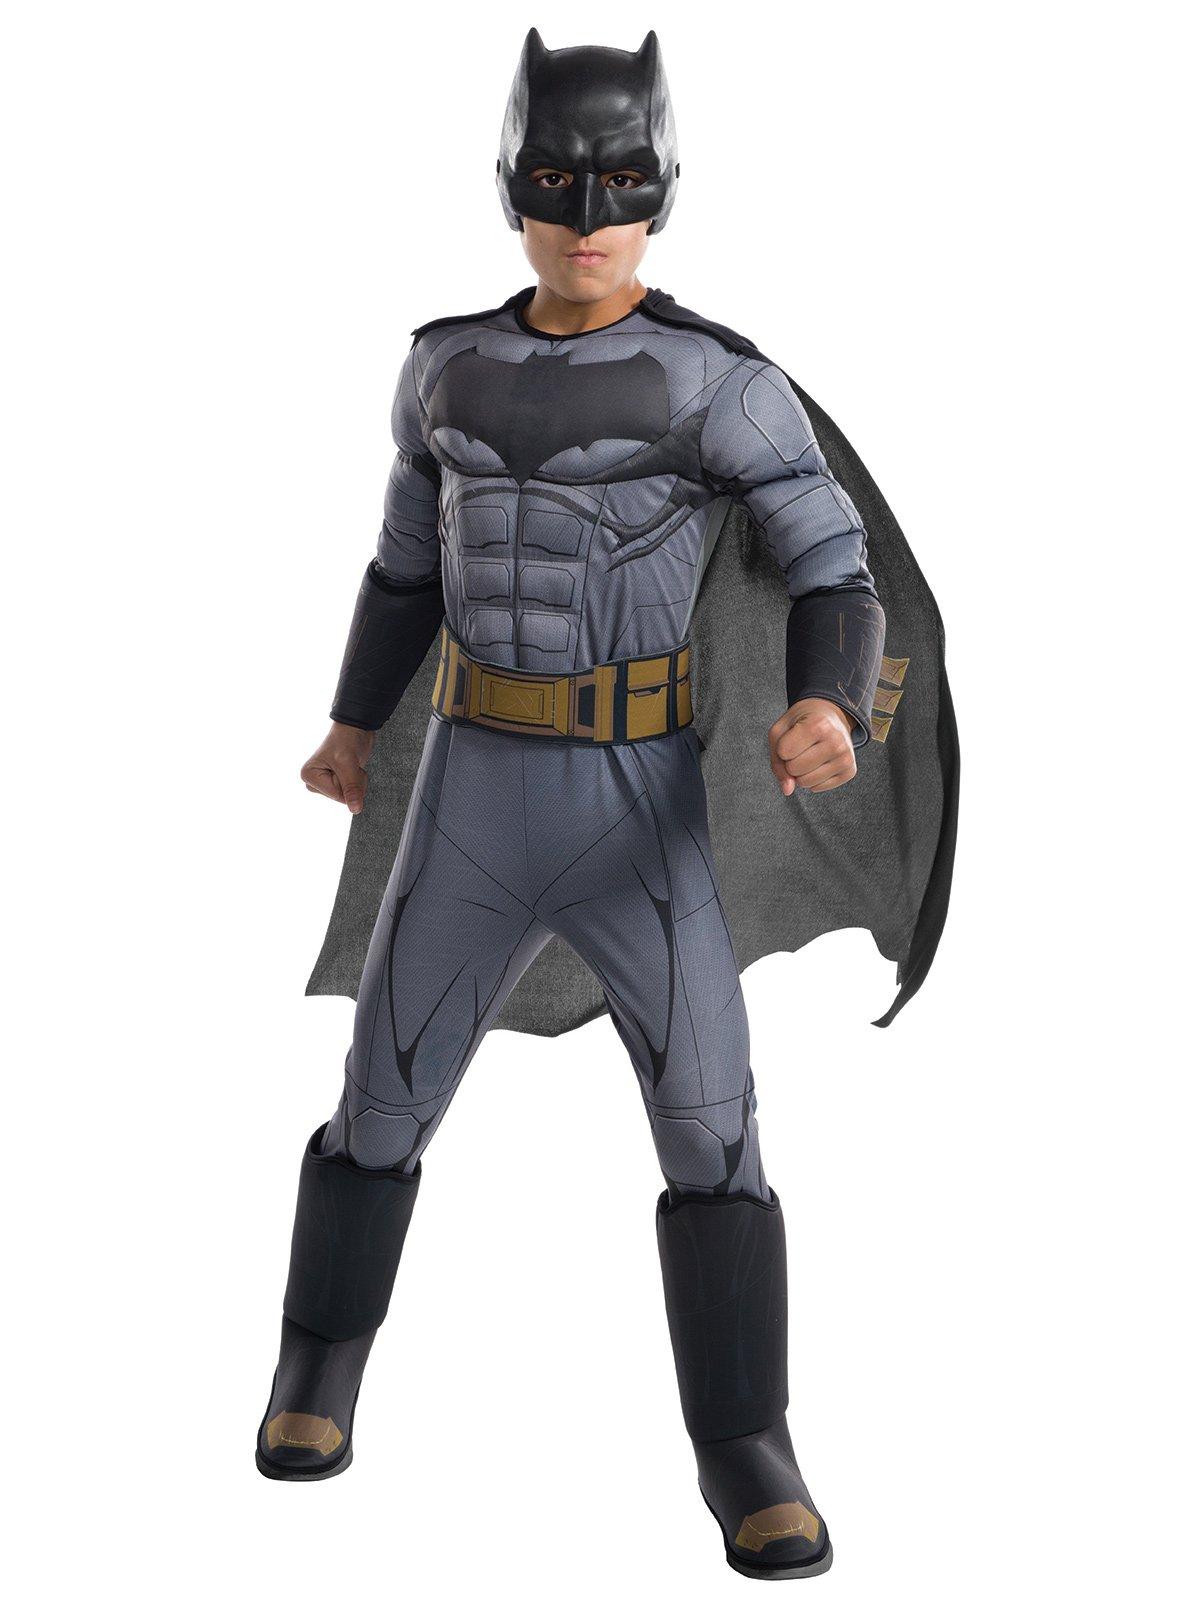 DC Comics Justice League Batman Deluxe Youth Costume, Size: Small, Rubie's Costume Company